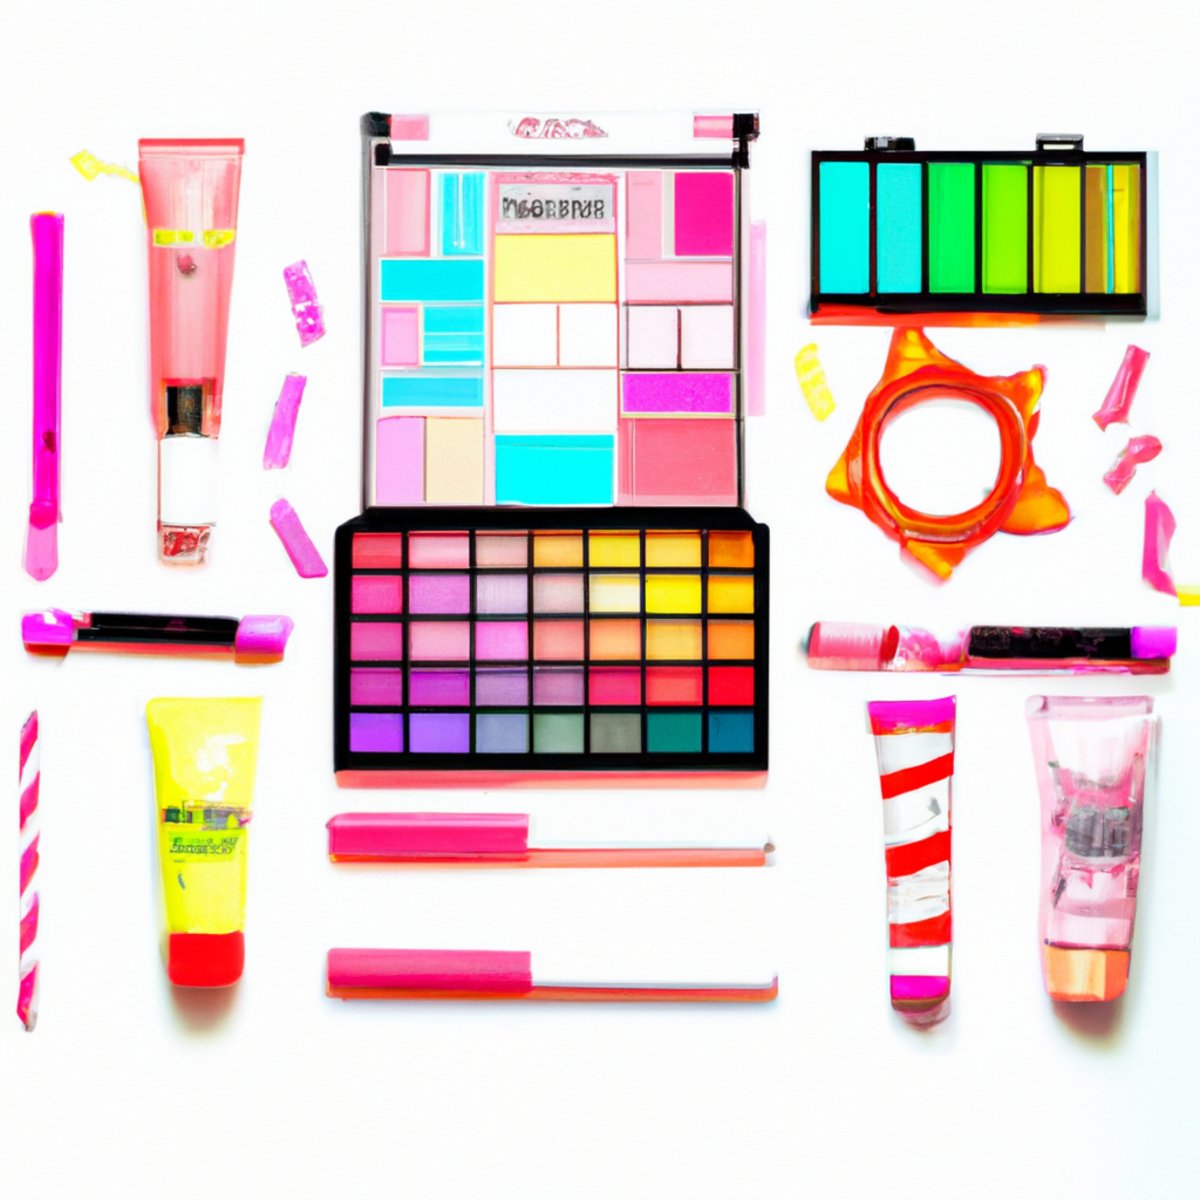 Vibrant neon makeup products arranged on a white background, showcasing a variety of shades for all skin tones.